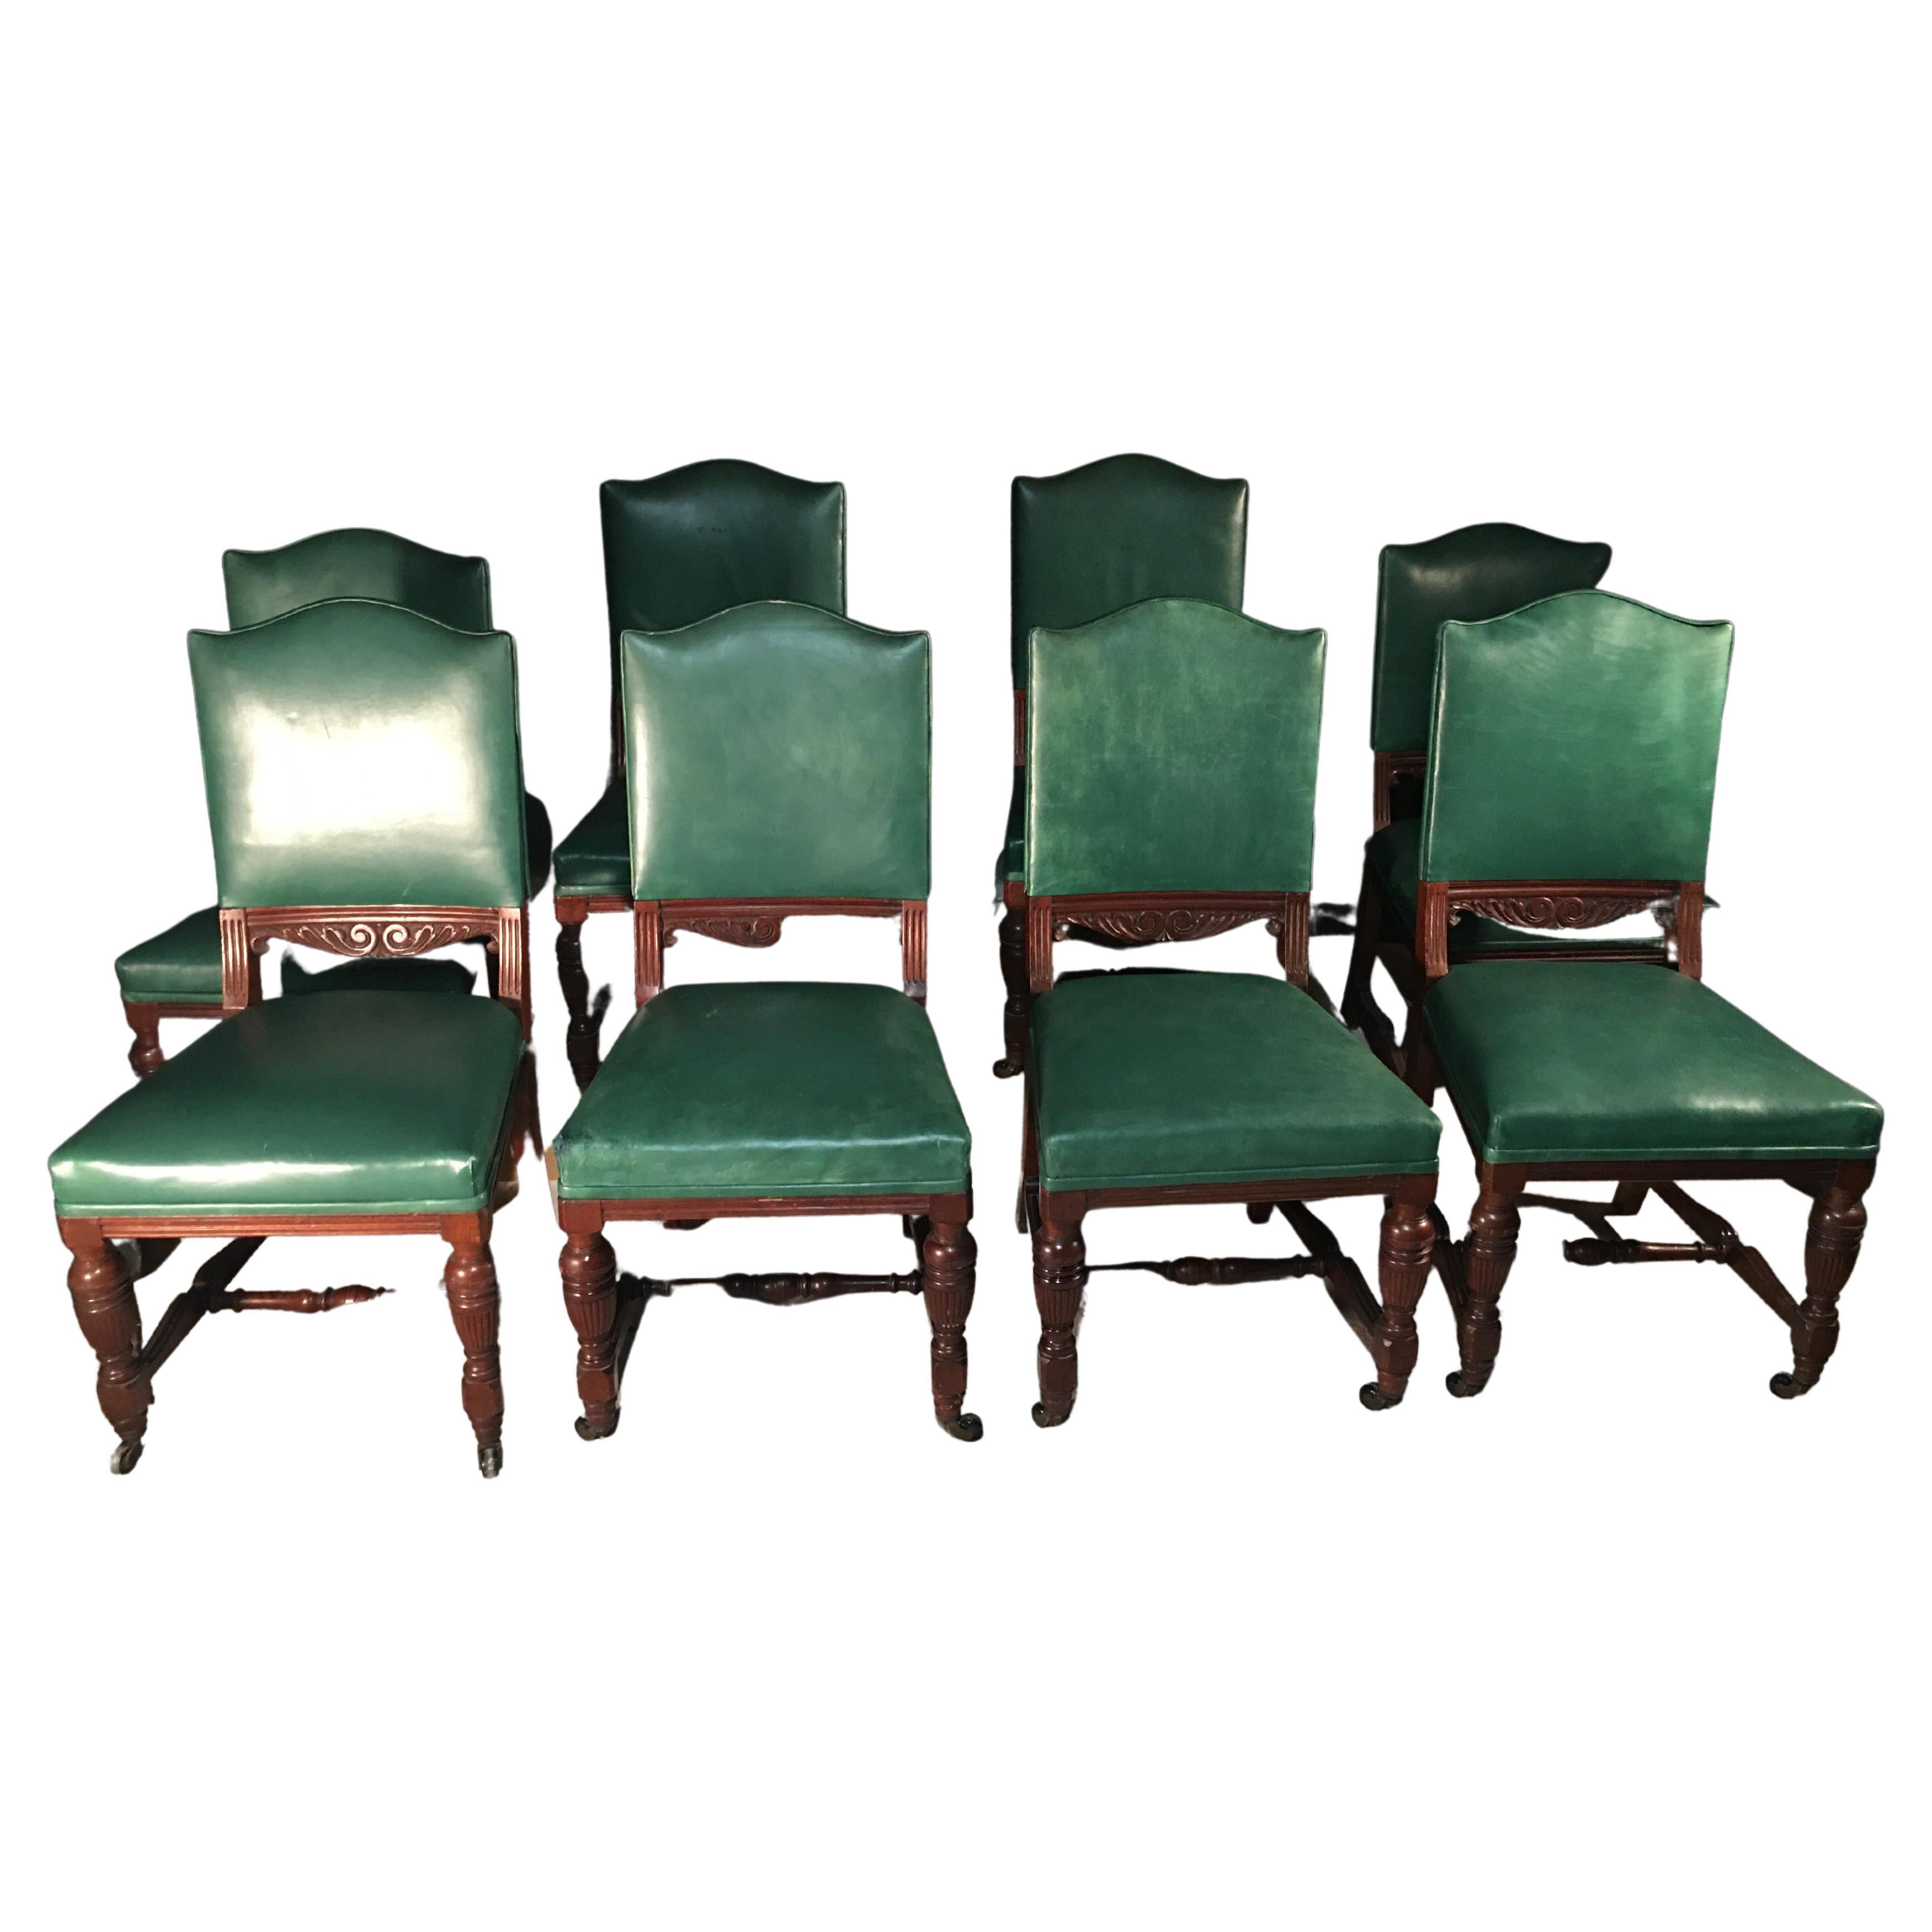 Series of 8 English Chairs in Green Leather, Mahogany, Early 20th Century For Sale